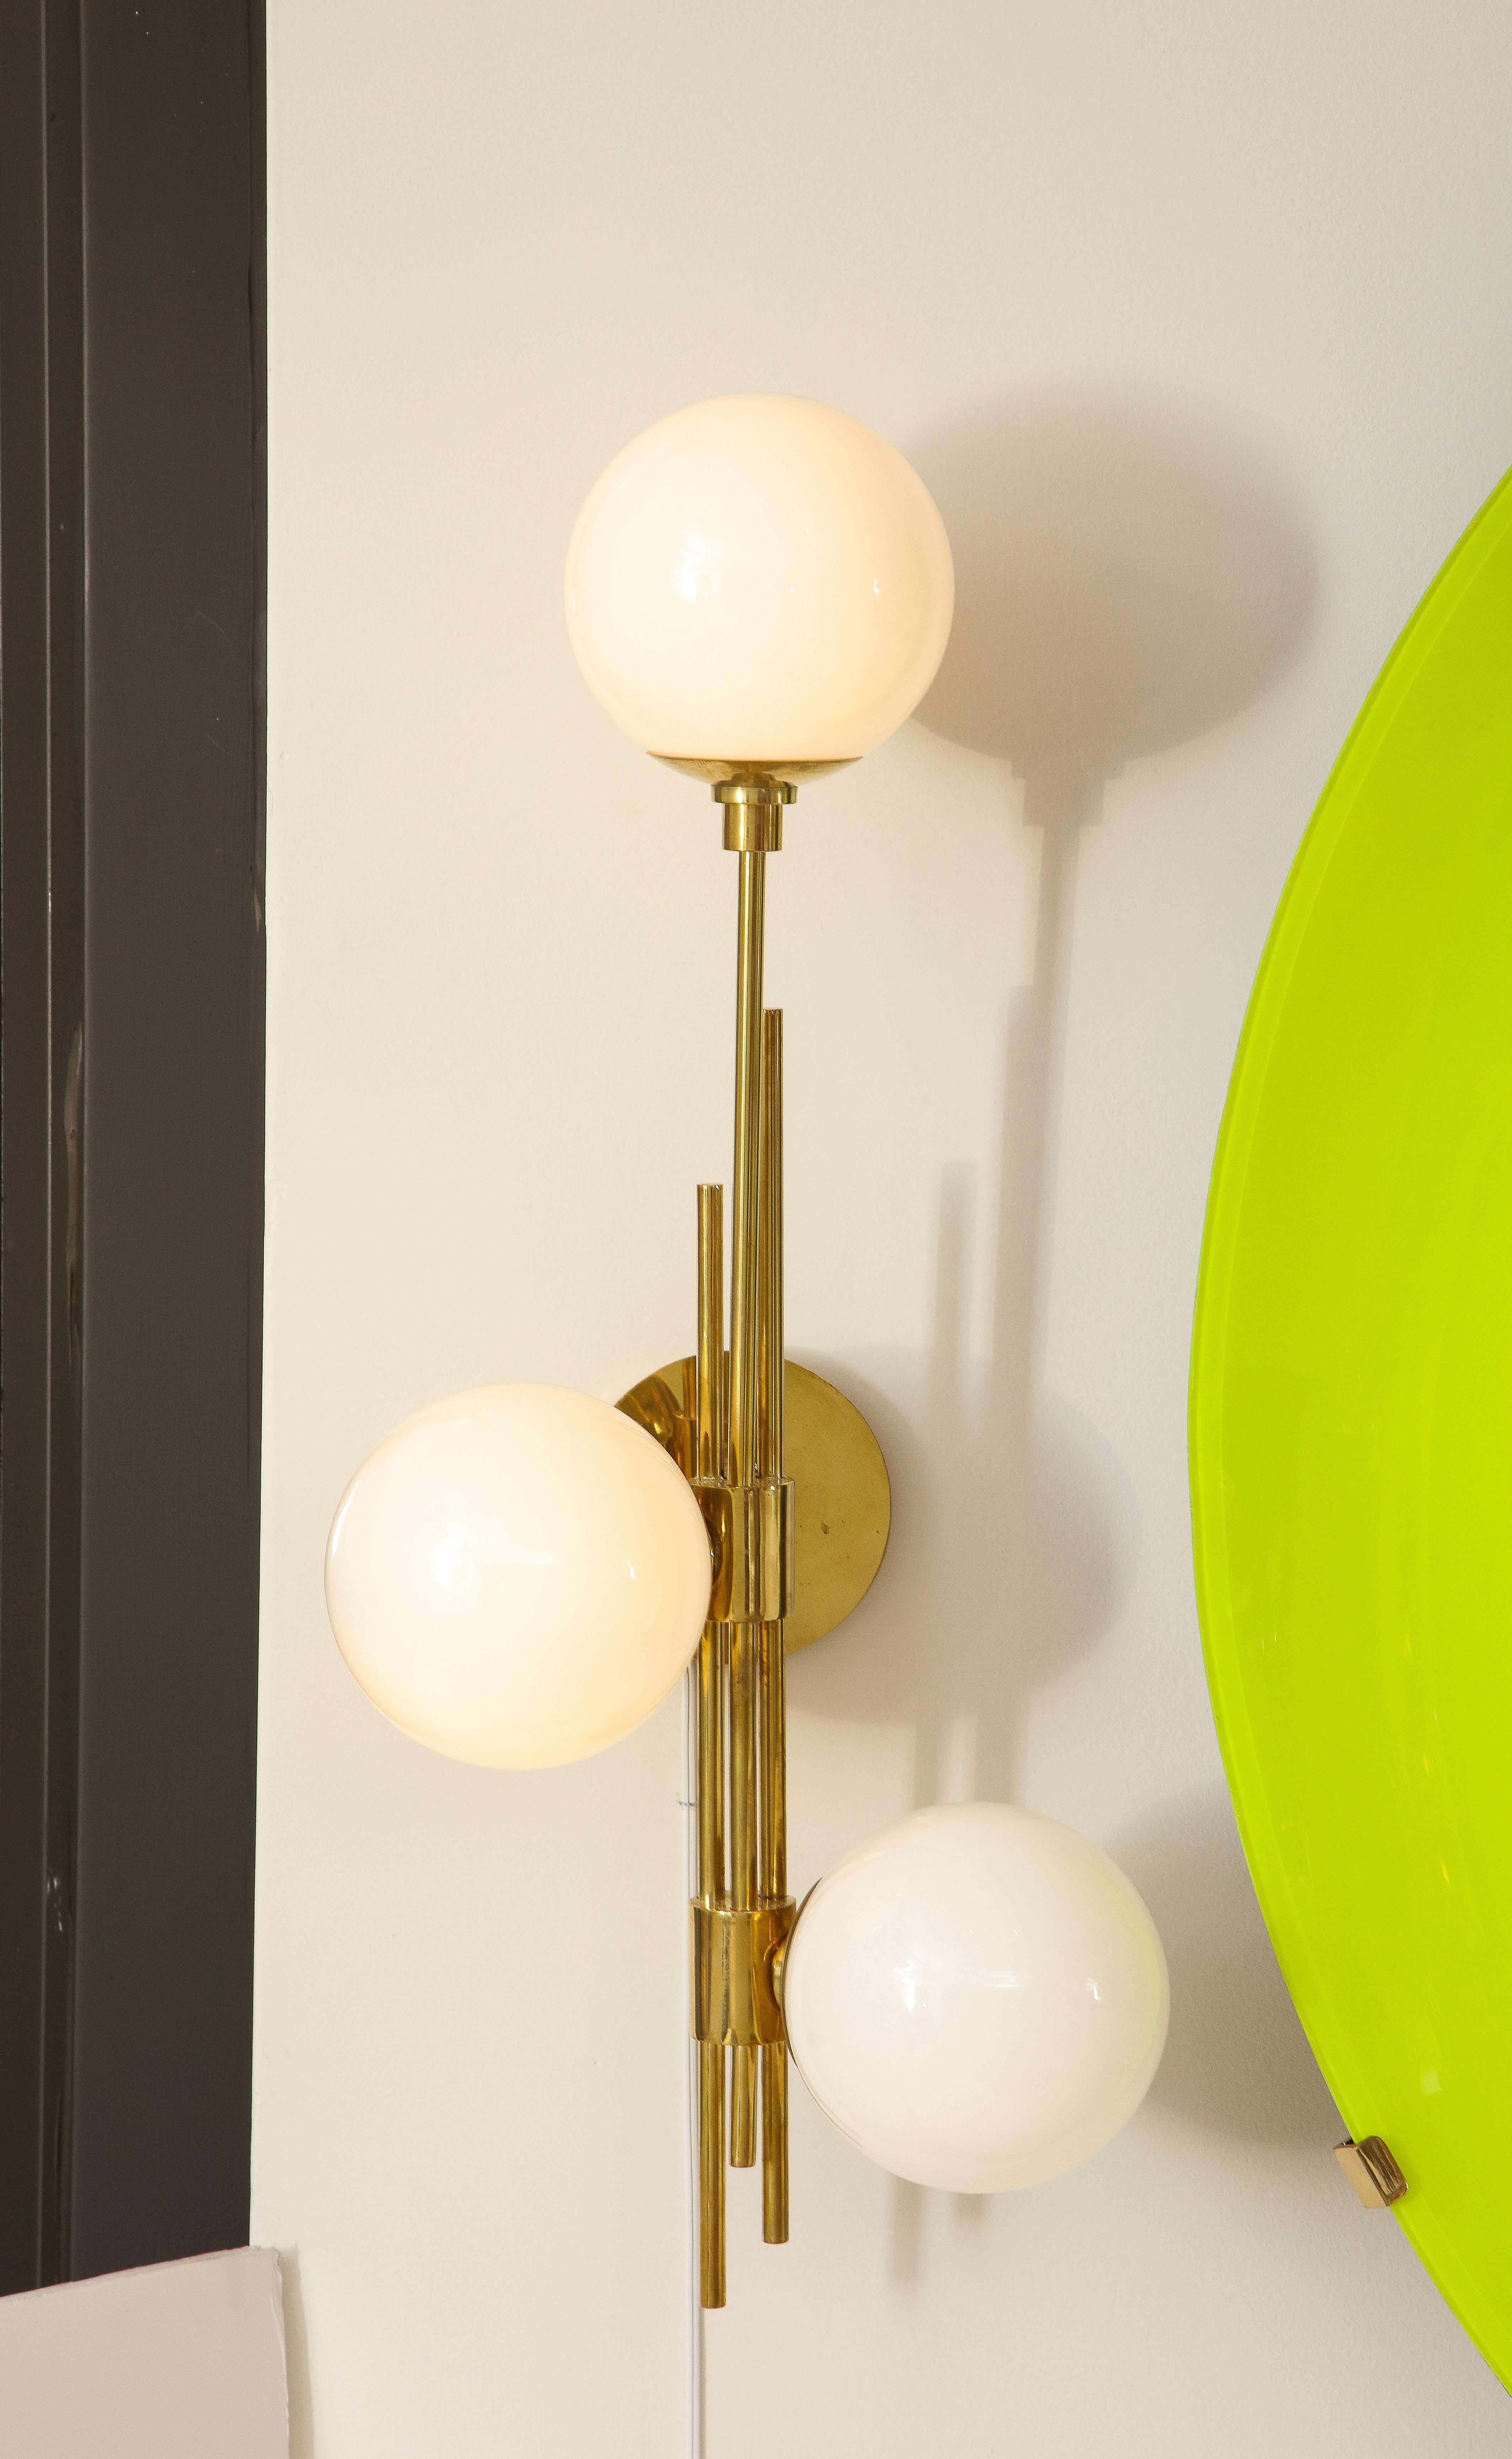 Tall Pair of Translucent White Murano Glass Globes and Brass Sconces, Italy 2022 For Sale 9